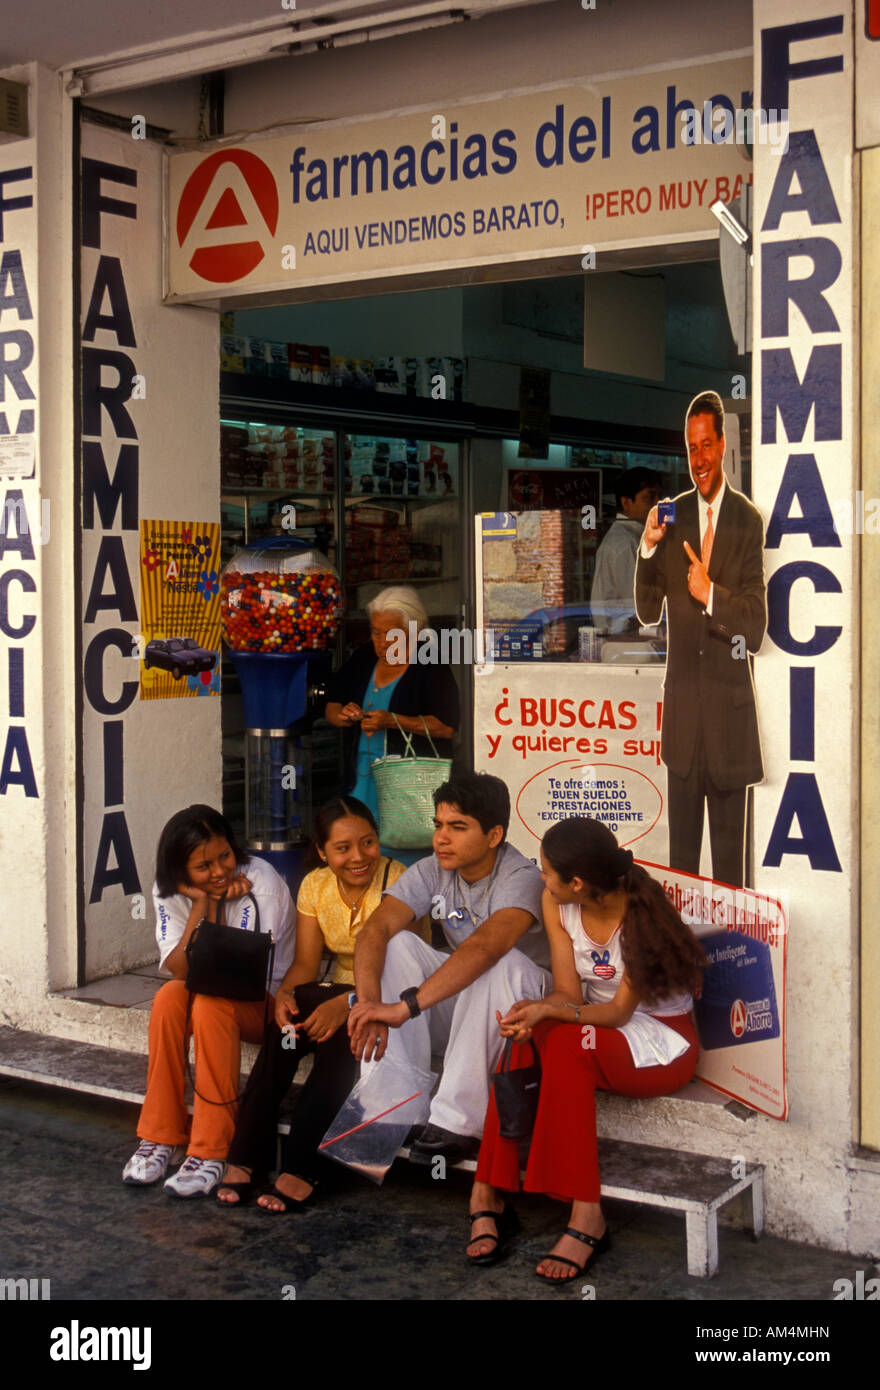 Mexican people sitting and talking in front of pharmacy along Calle Macedonio Alcala Street city of Oaxaca Oaxaca State Mexico Stock Photo